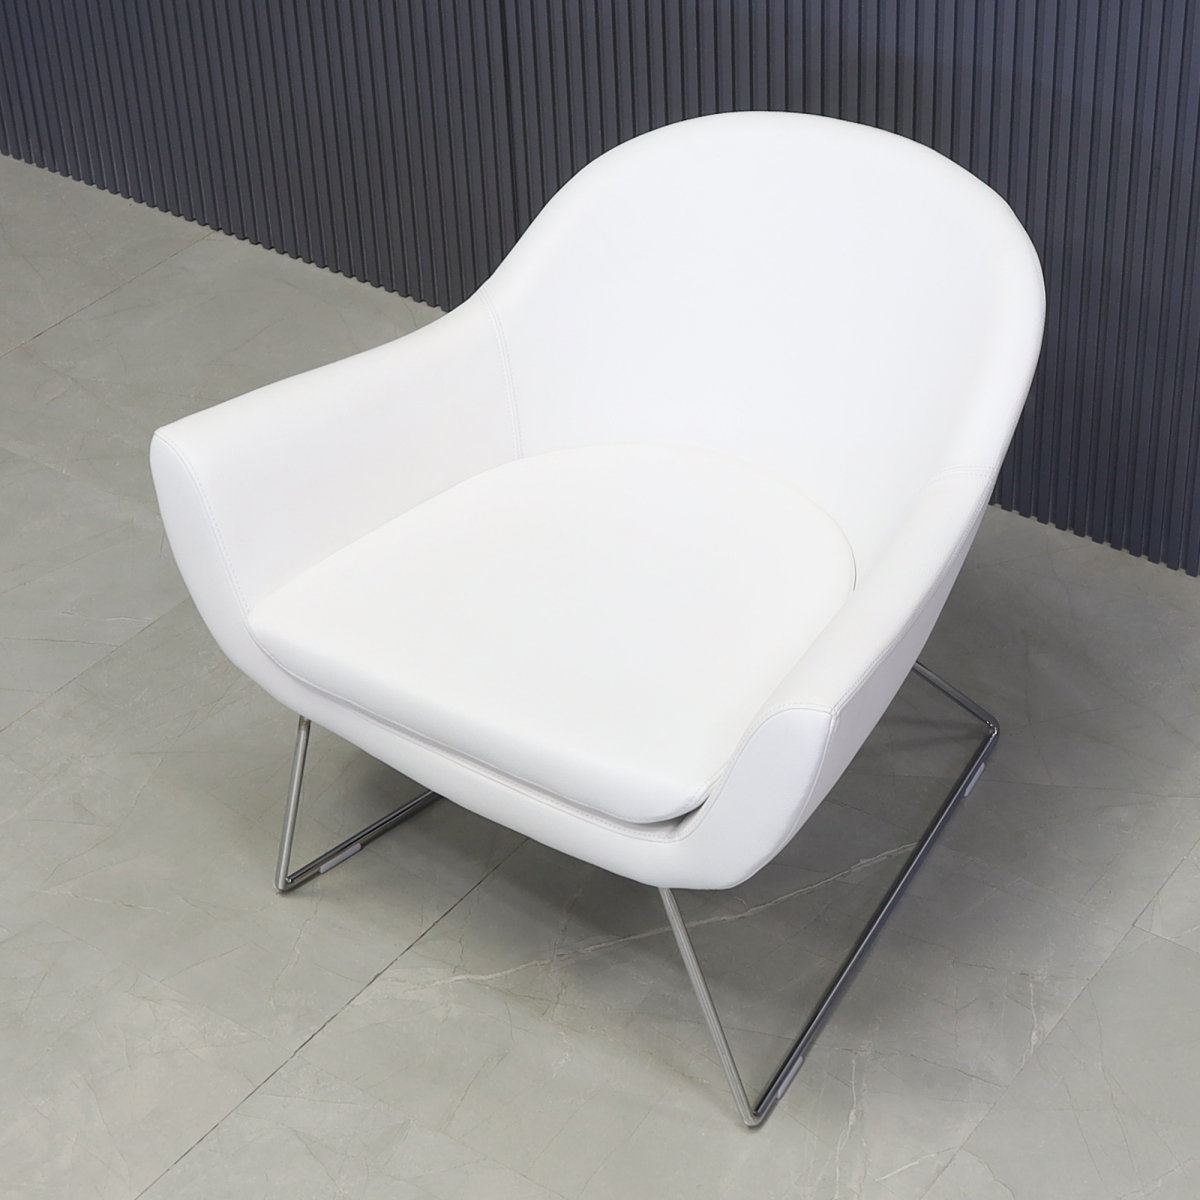 Set of Two White Leatherette Lounge Chairs and One FREE Norfolk Round Lobby Side Table - Stock